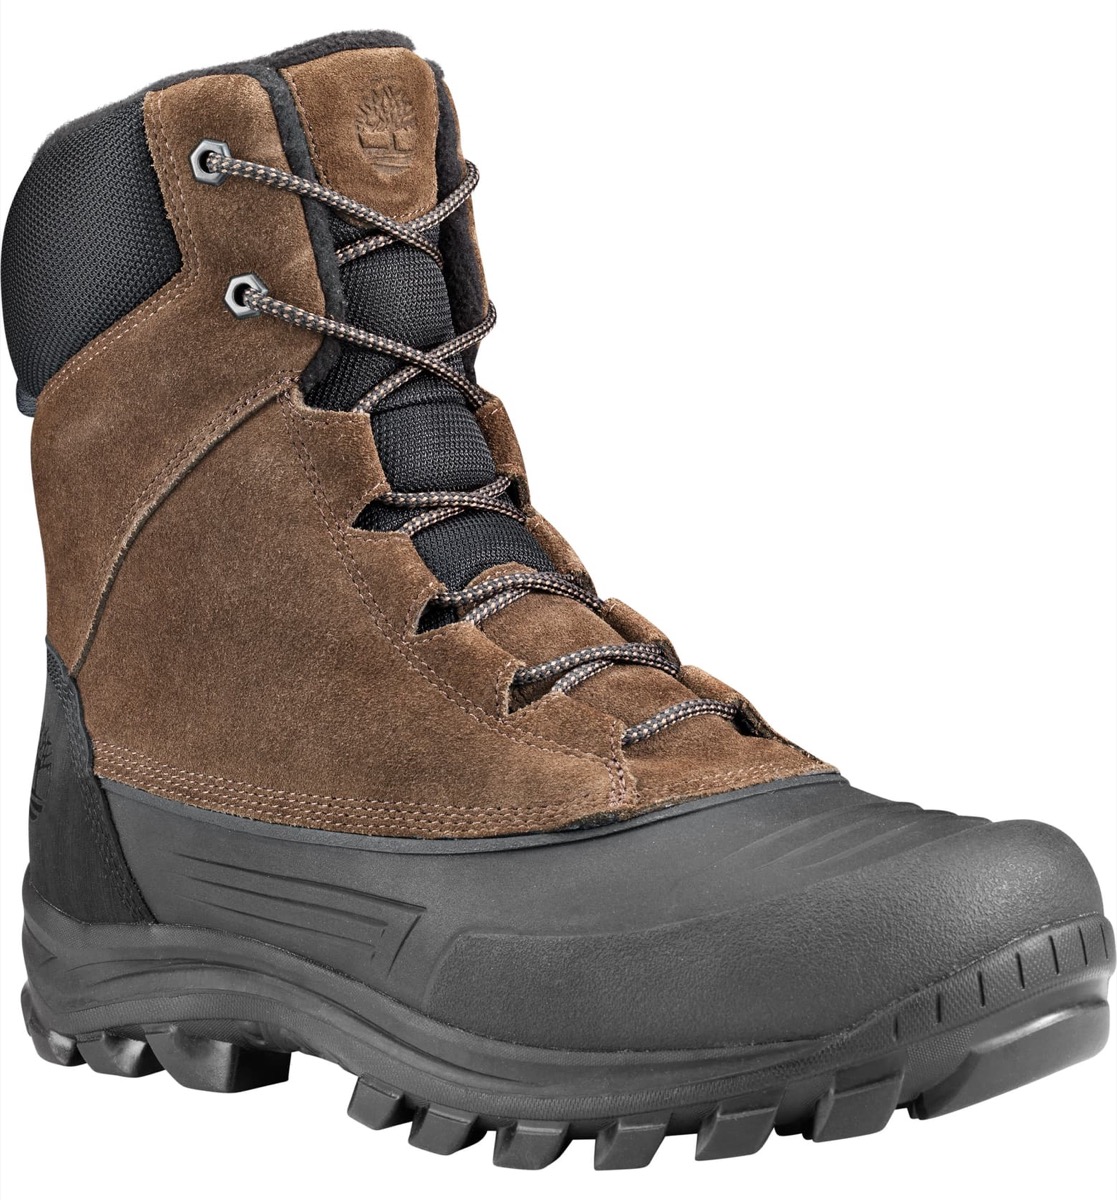 timberland snow boots, men's winter boots